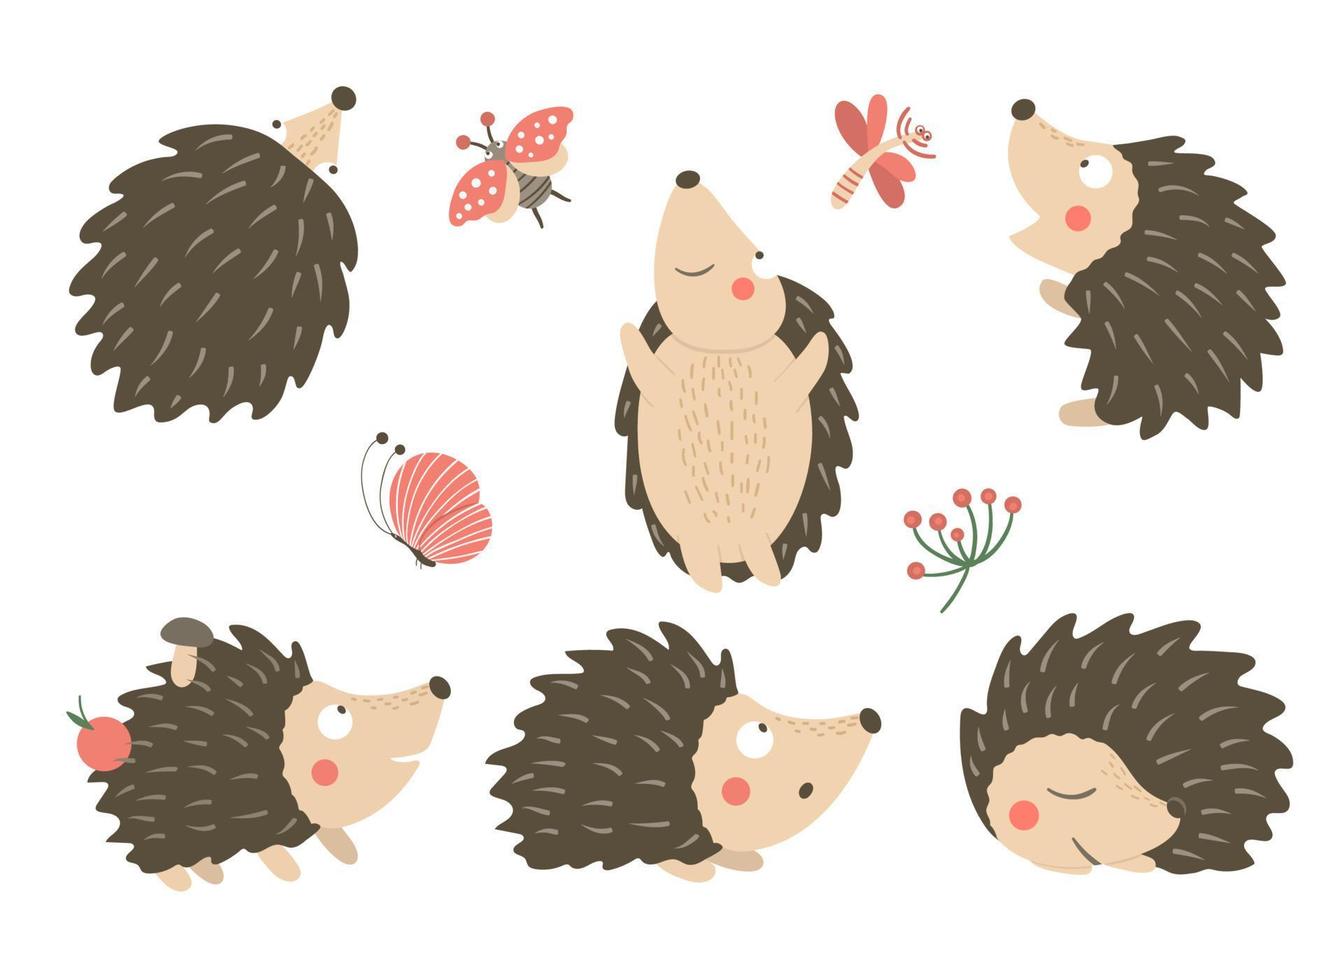 Vector set of cartoon style flat funny hedgehogs in different poses with dragonfly, butterfly, ladybug clip art. Cute illustration of woodland animals